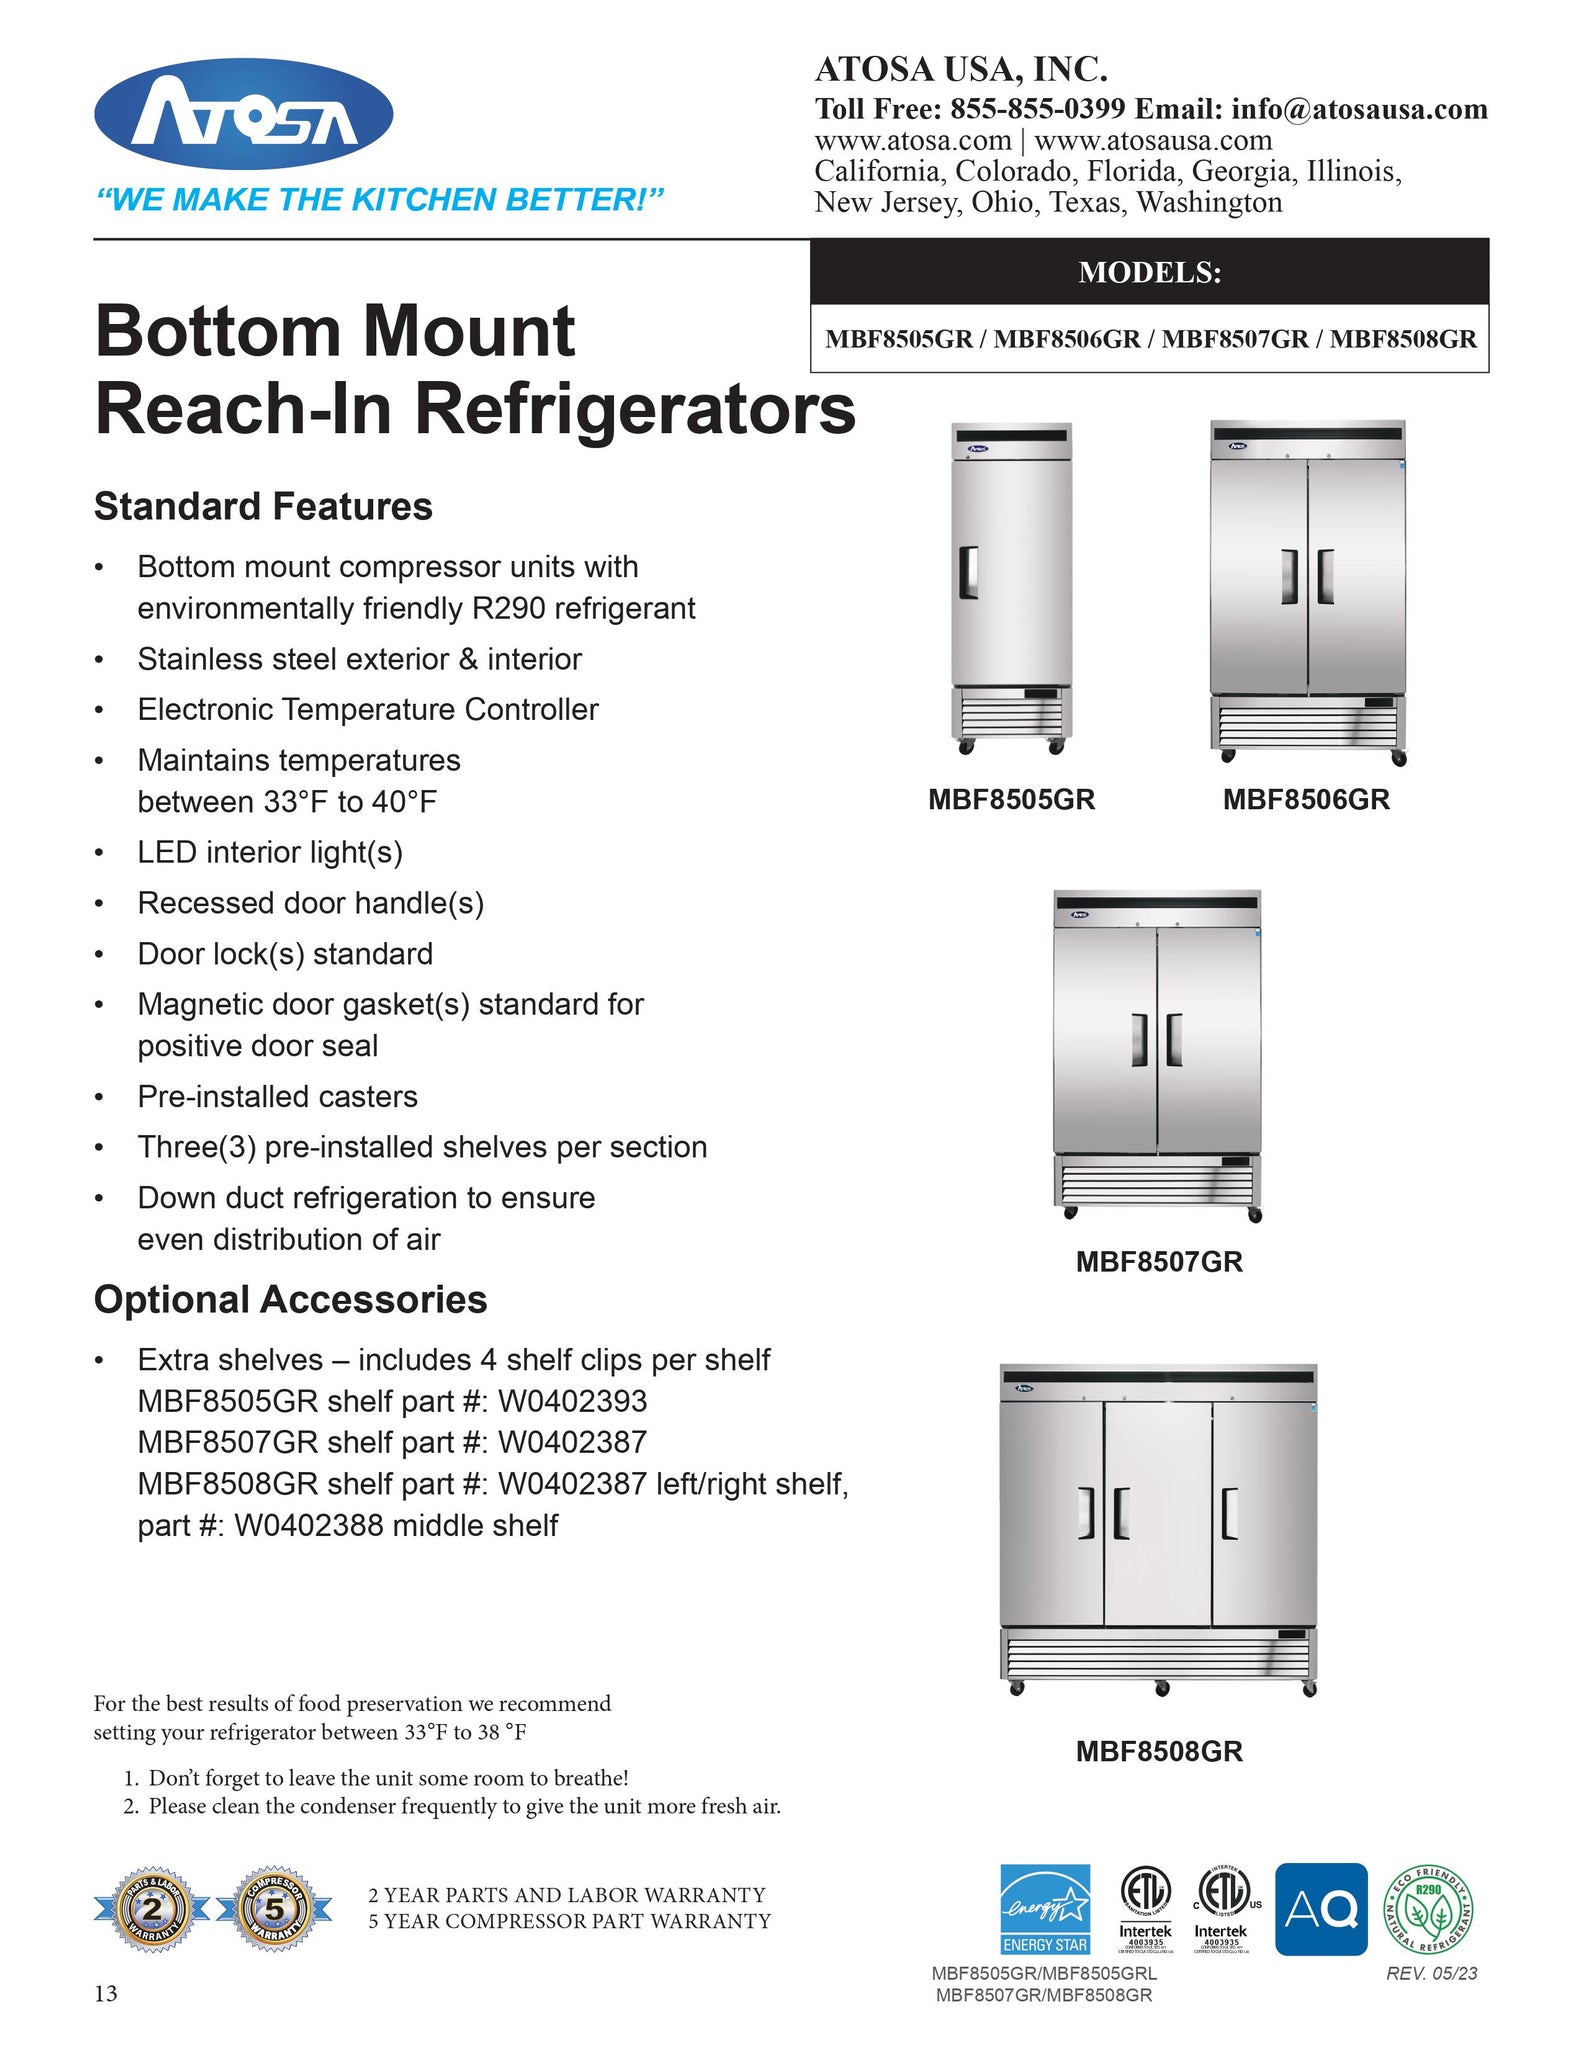 Atosa MBF8507GR 54" Two Section Solid Door Reach-In Refrigerator